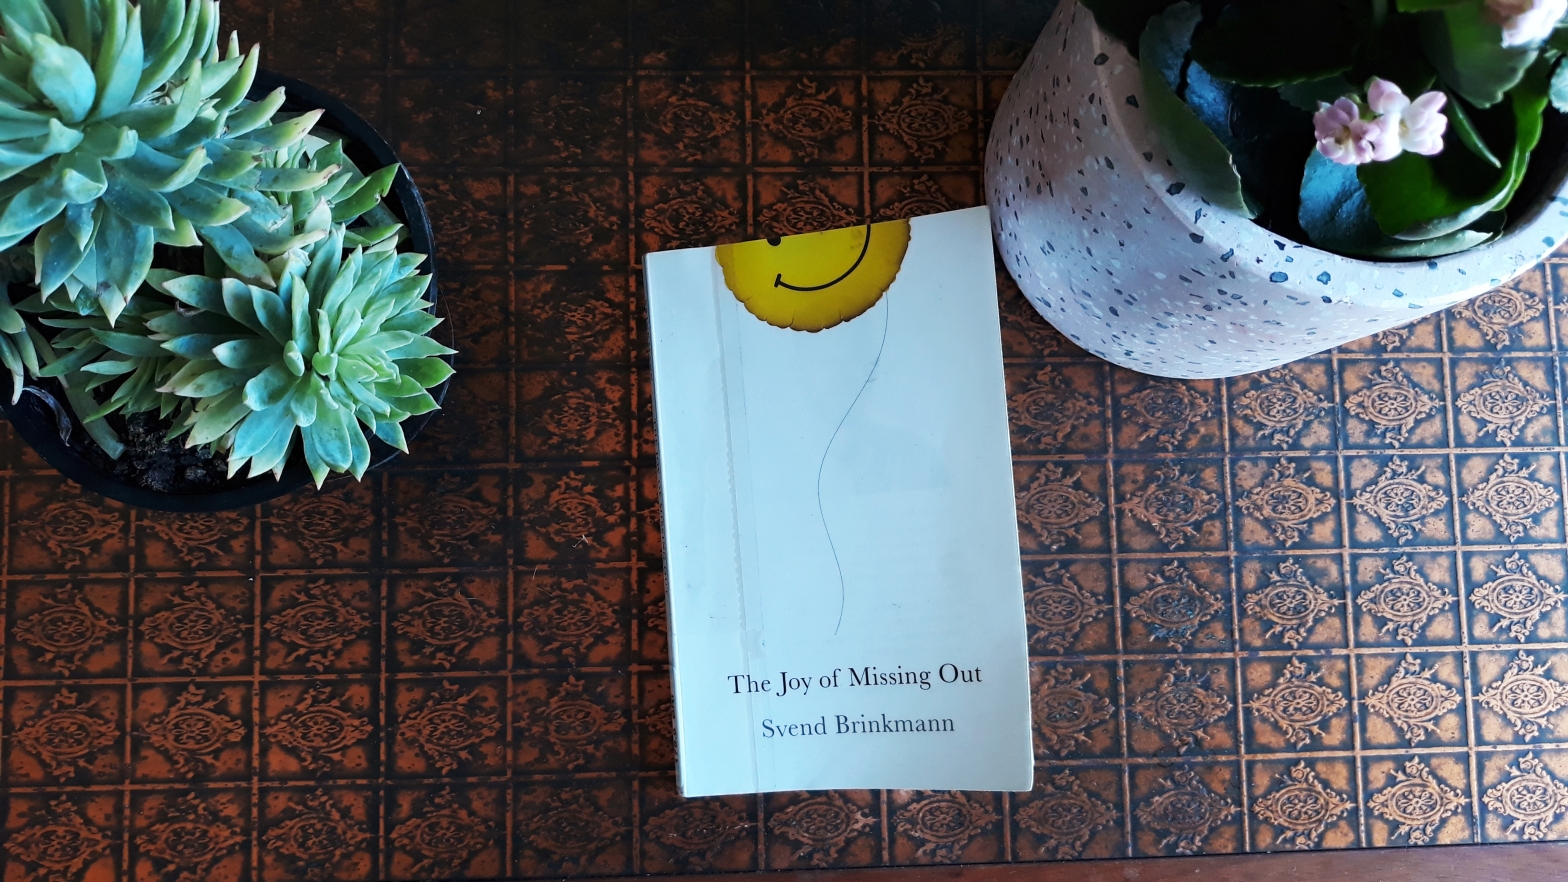 The Joy of Missing Out by Svend Brinkmann